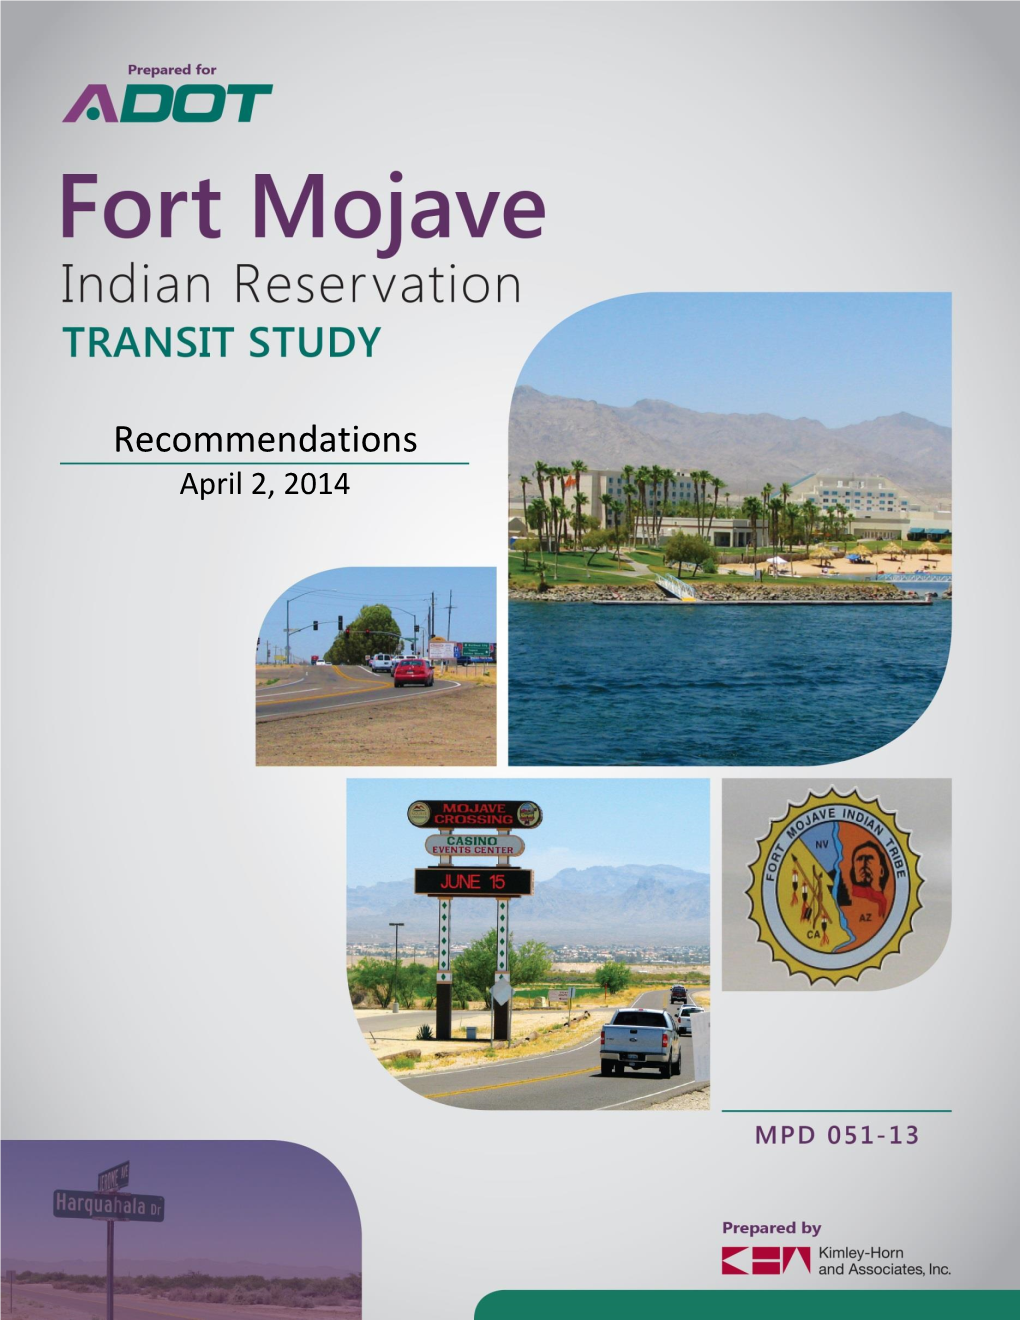 Fort Mojave Indian Reservation Transit Study: Recommendations